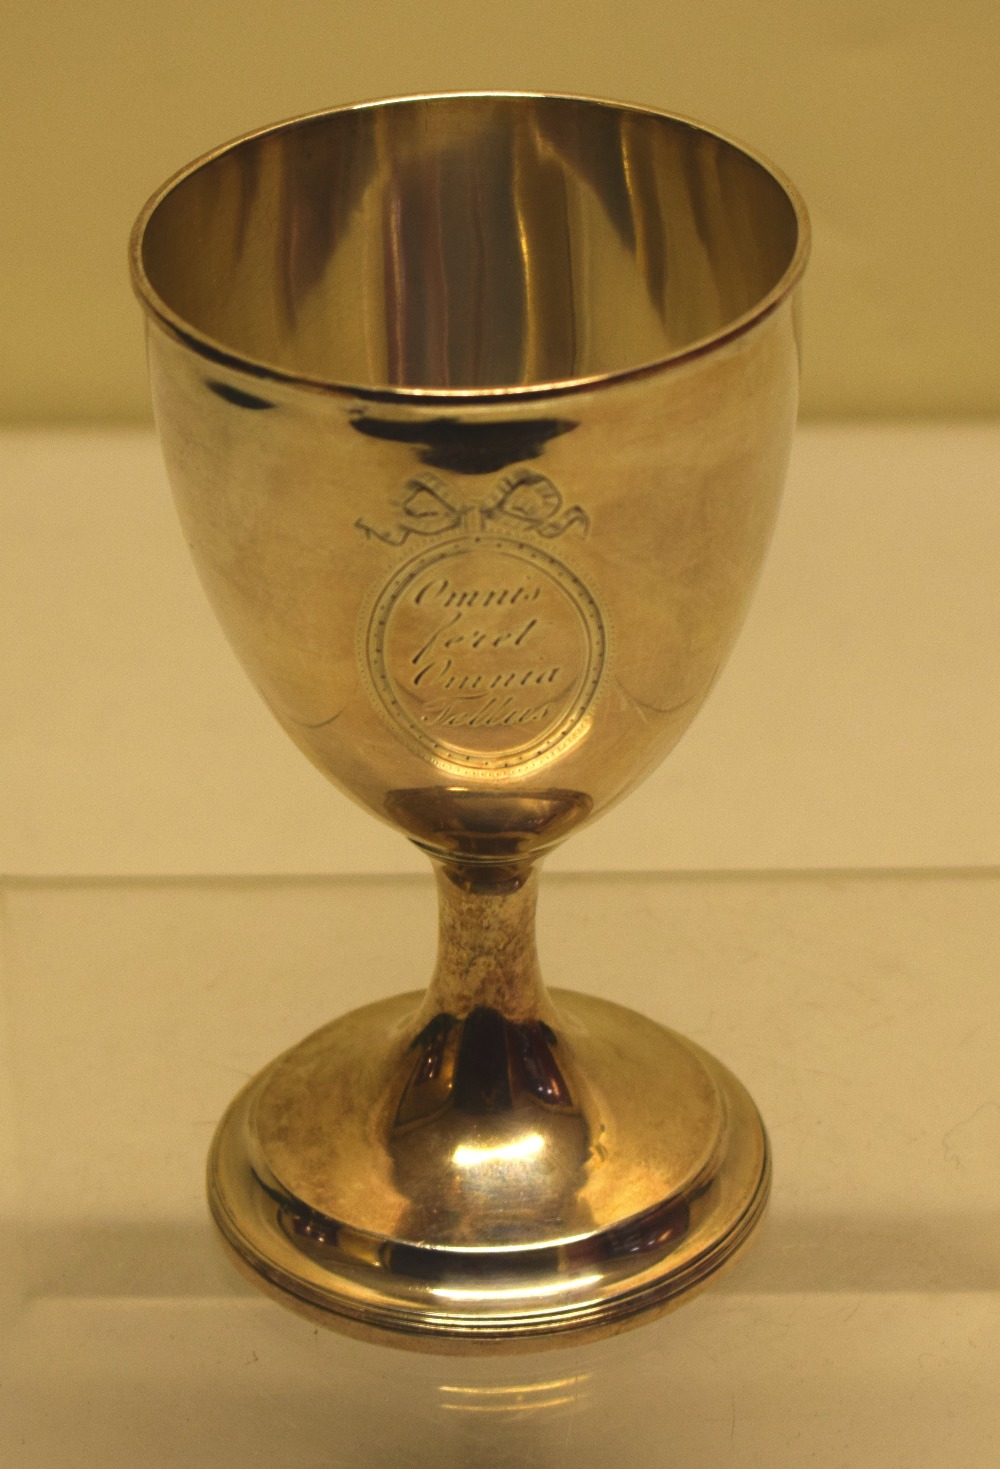 A George III silver wine goblet, the bowl with a Latin inscription in an oval cartouche, on a reeded